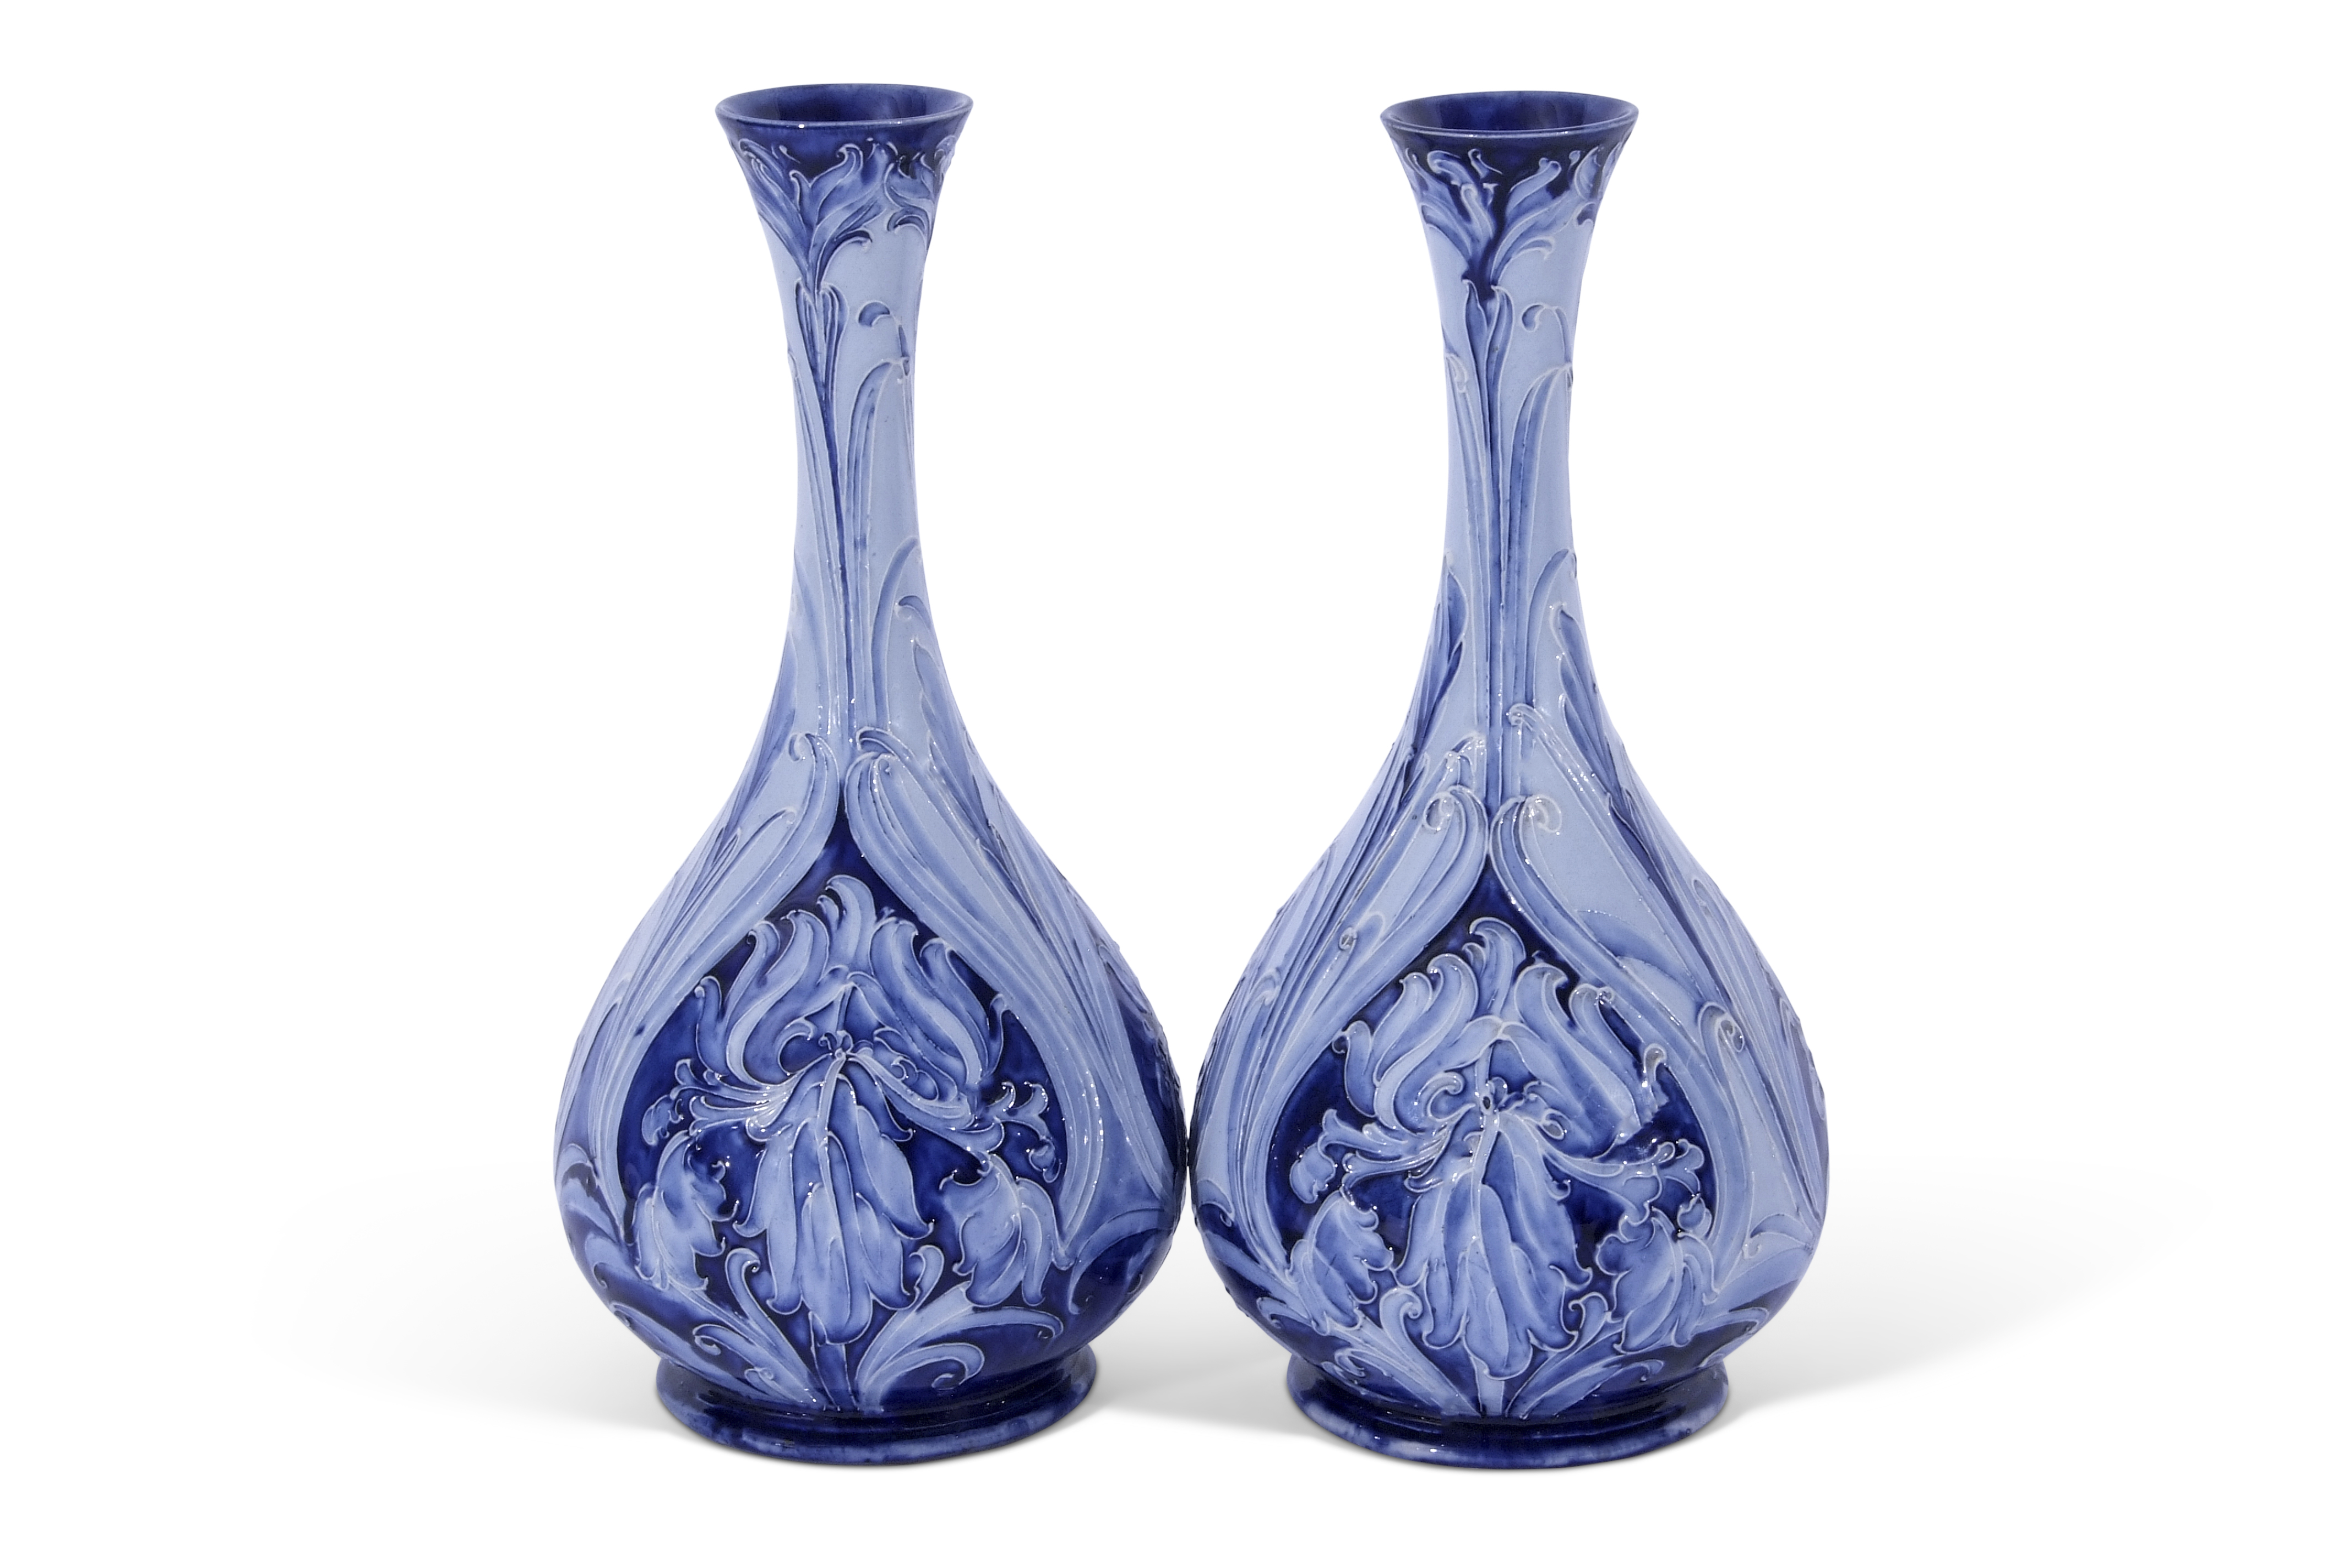 Good pair of early Moorcroft Florian ware vases, the pear shaped bodies with tube lined floral